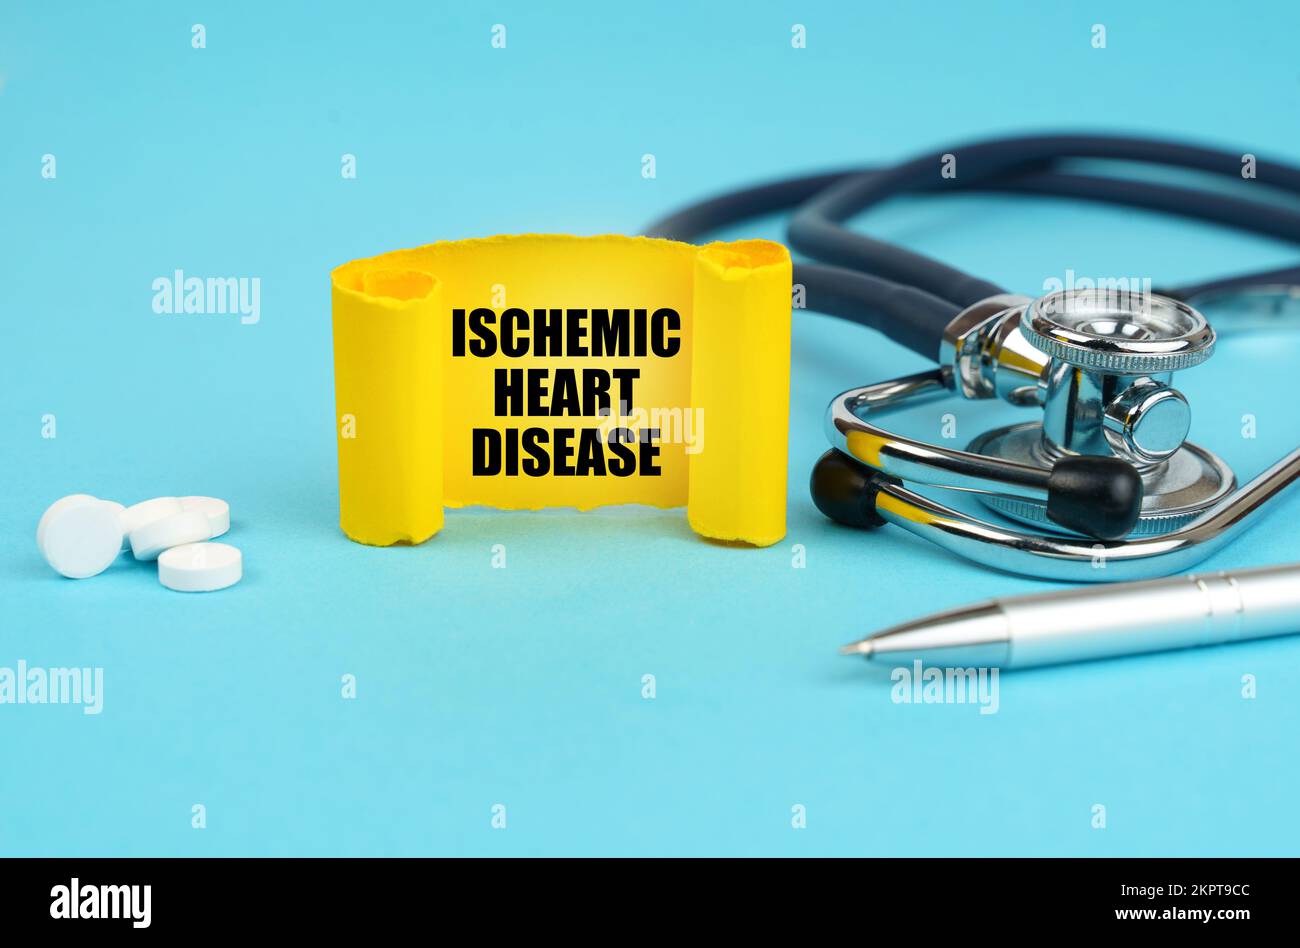 Medical concept. On a blue surface, a stethoscope, pills, a pen and a yellow sign with the inscription - Ischemic Heart Disease Stock Photo